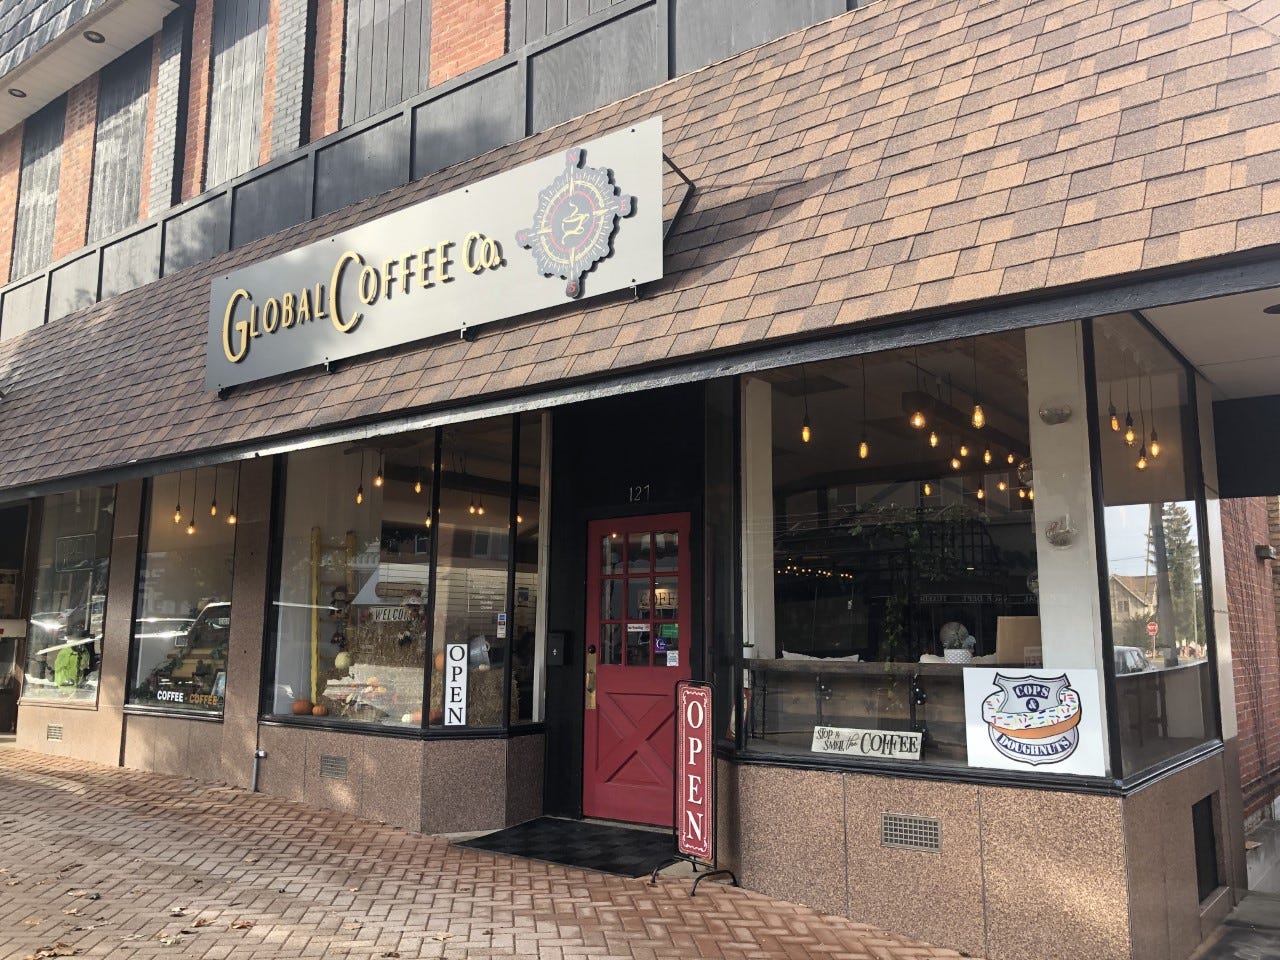 Global Coffee Co., a St. Johns coffee shop, just marked its one-year anniversary in the city's downtown. Owner Amber Haubert said she plans to expand the business next year, adding a gift shop in space behind the existing shop.